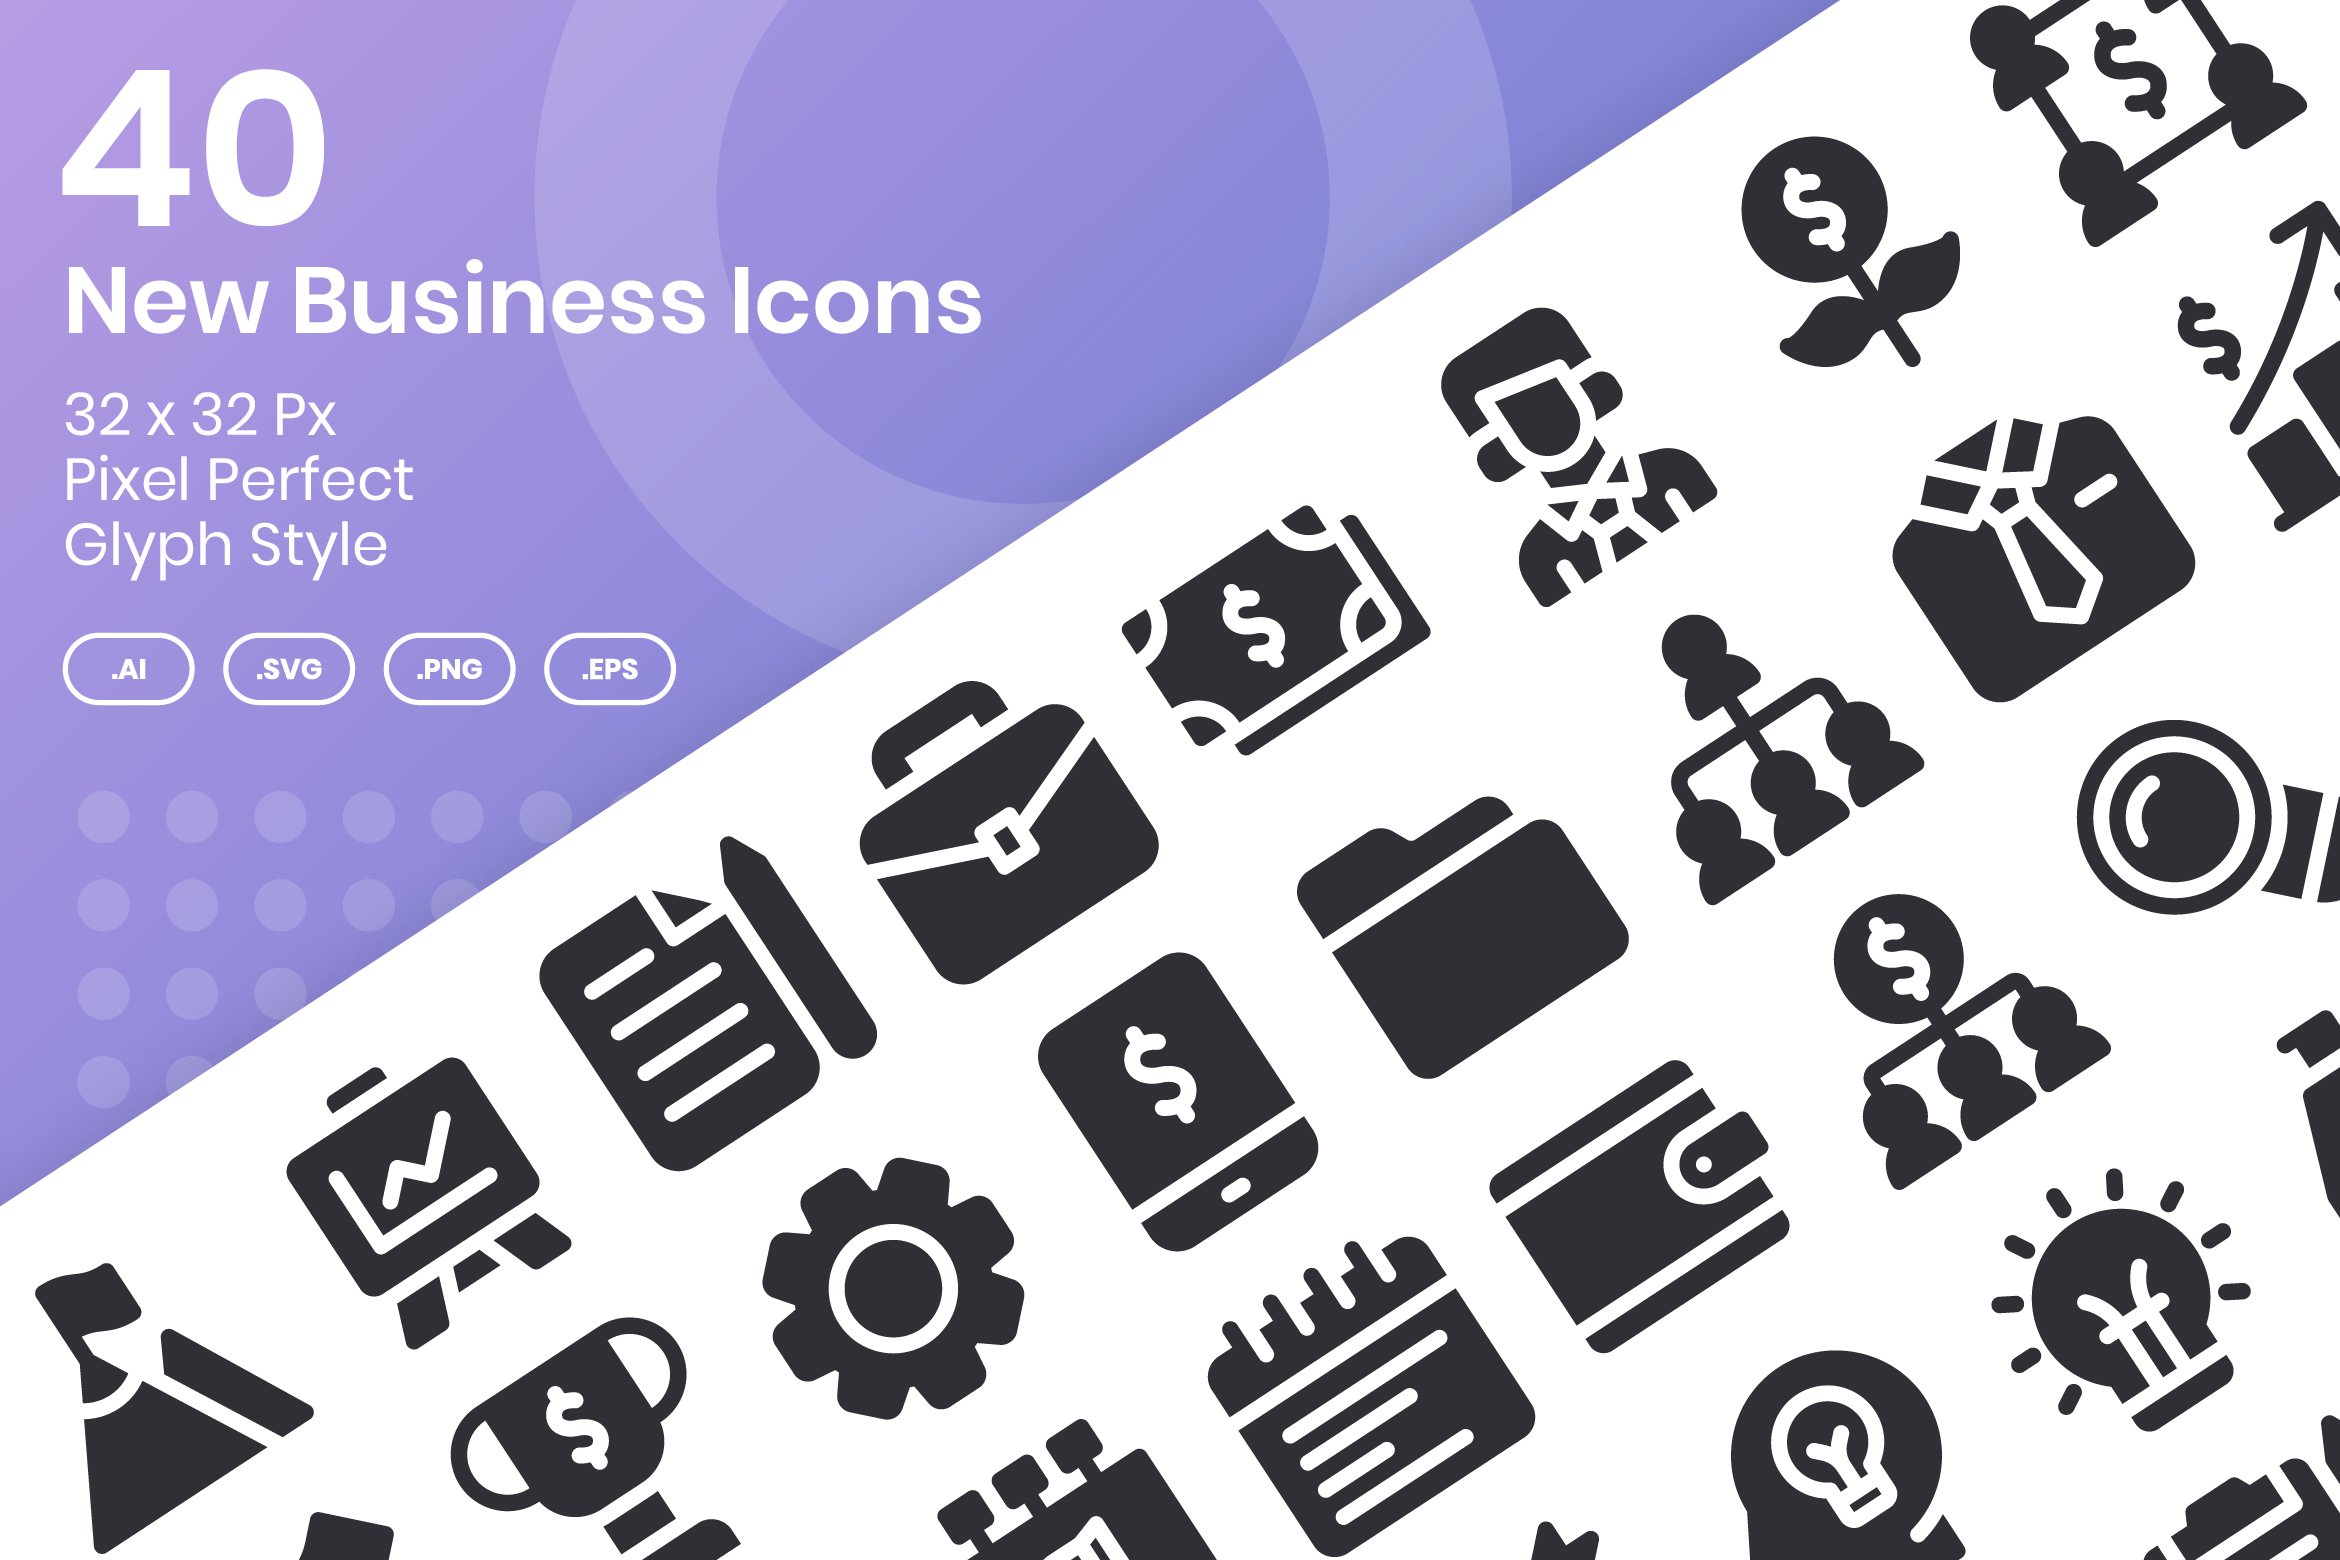 40 New Business - Glyph cover image.